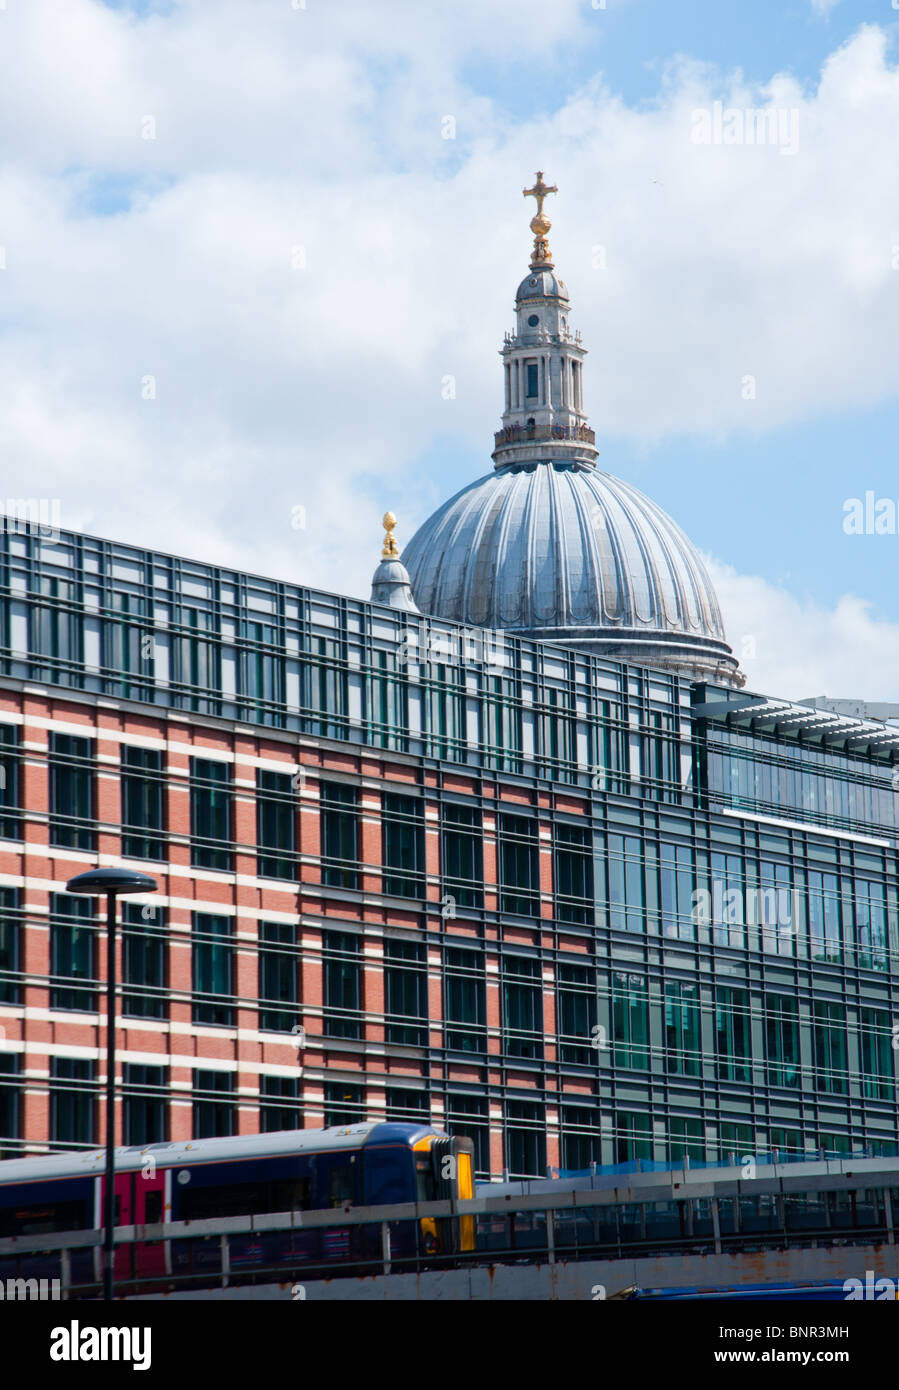 St Paul's Cathedral seen over modern buildings as a train goes past. Stock Photo